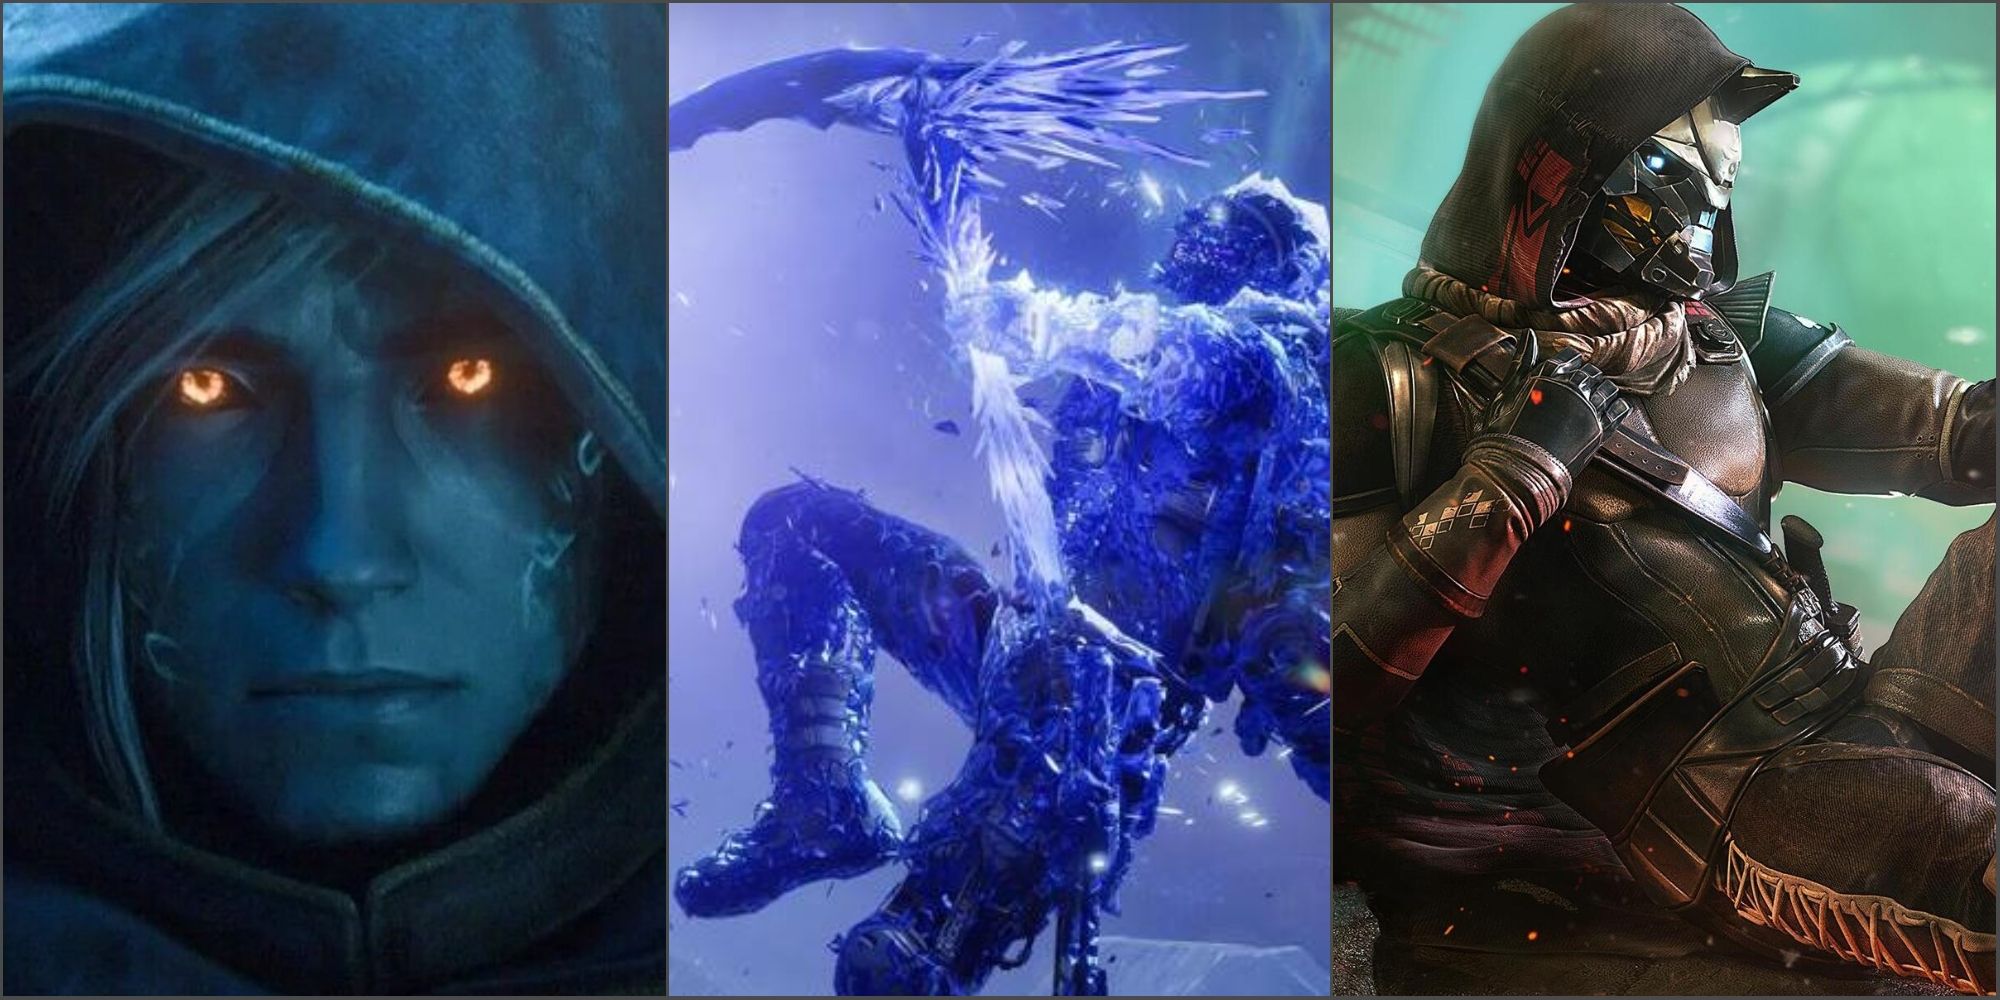 Destiny 2: Uldren Sov, Cayde-6, and a hunter using their stasis super